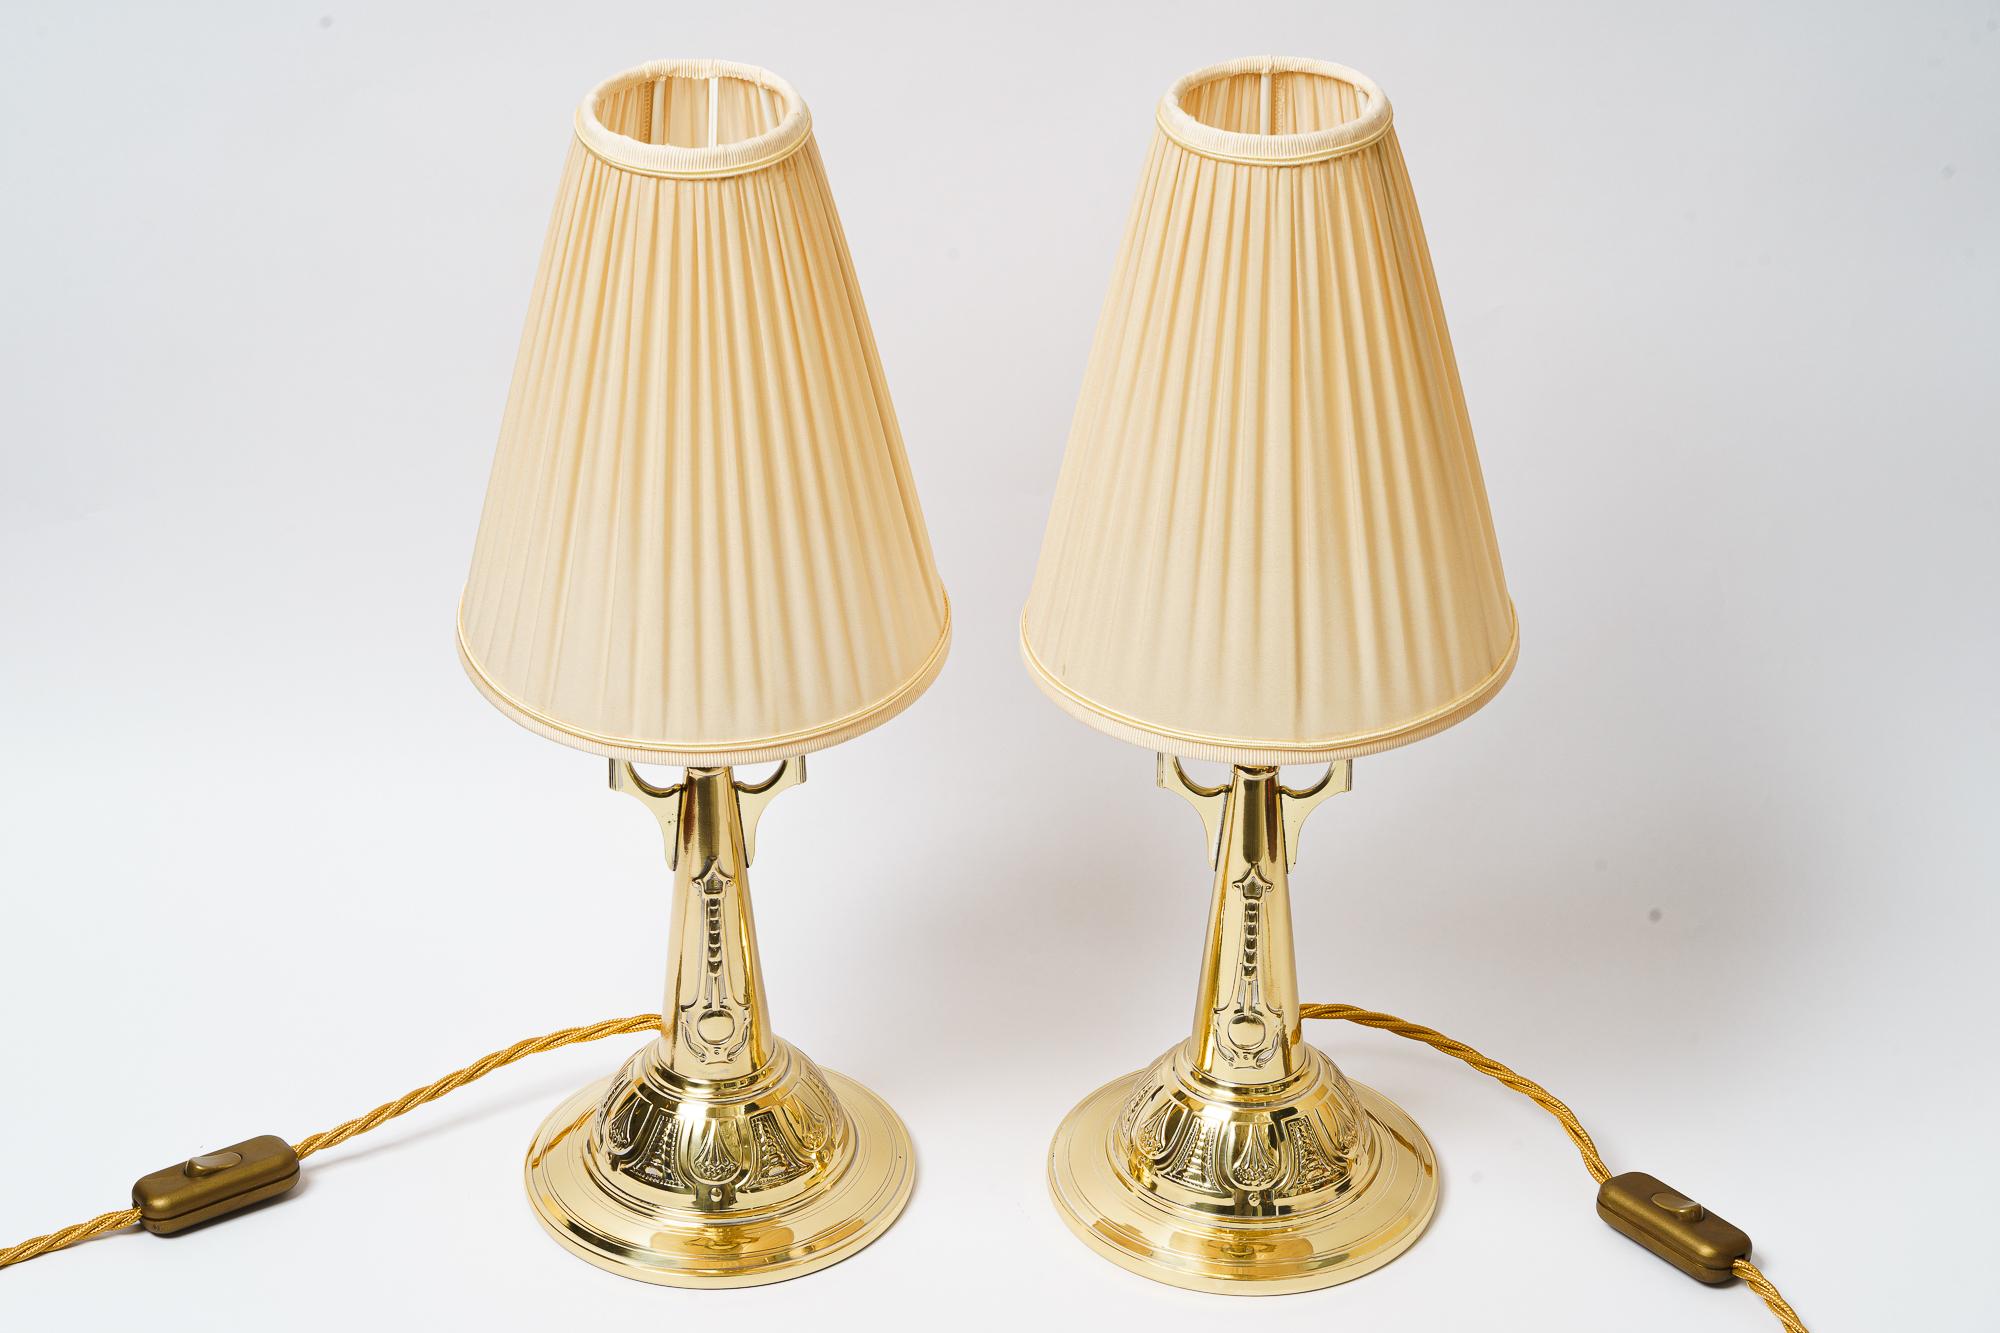 Two Art Deco Table lamp with fabric shades vienna around 1920s
Polished and stove enameled
The fabric shades are replaced ( new )